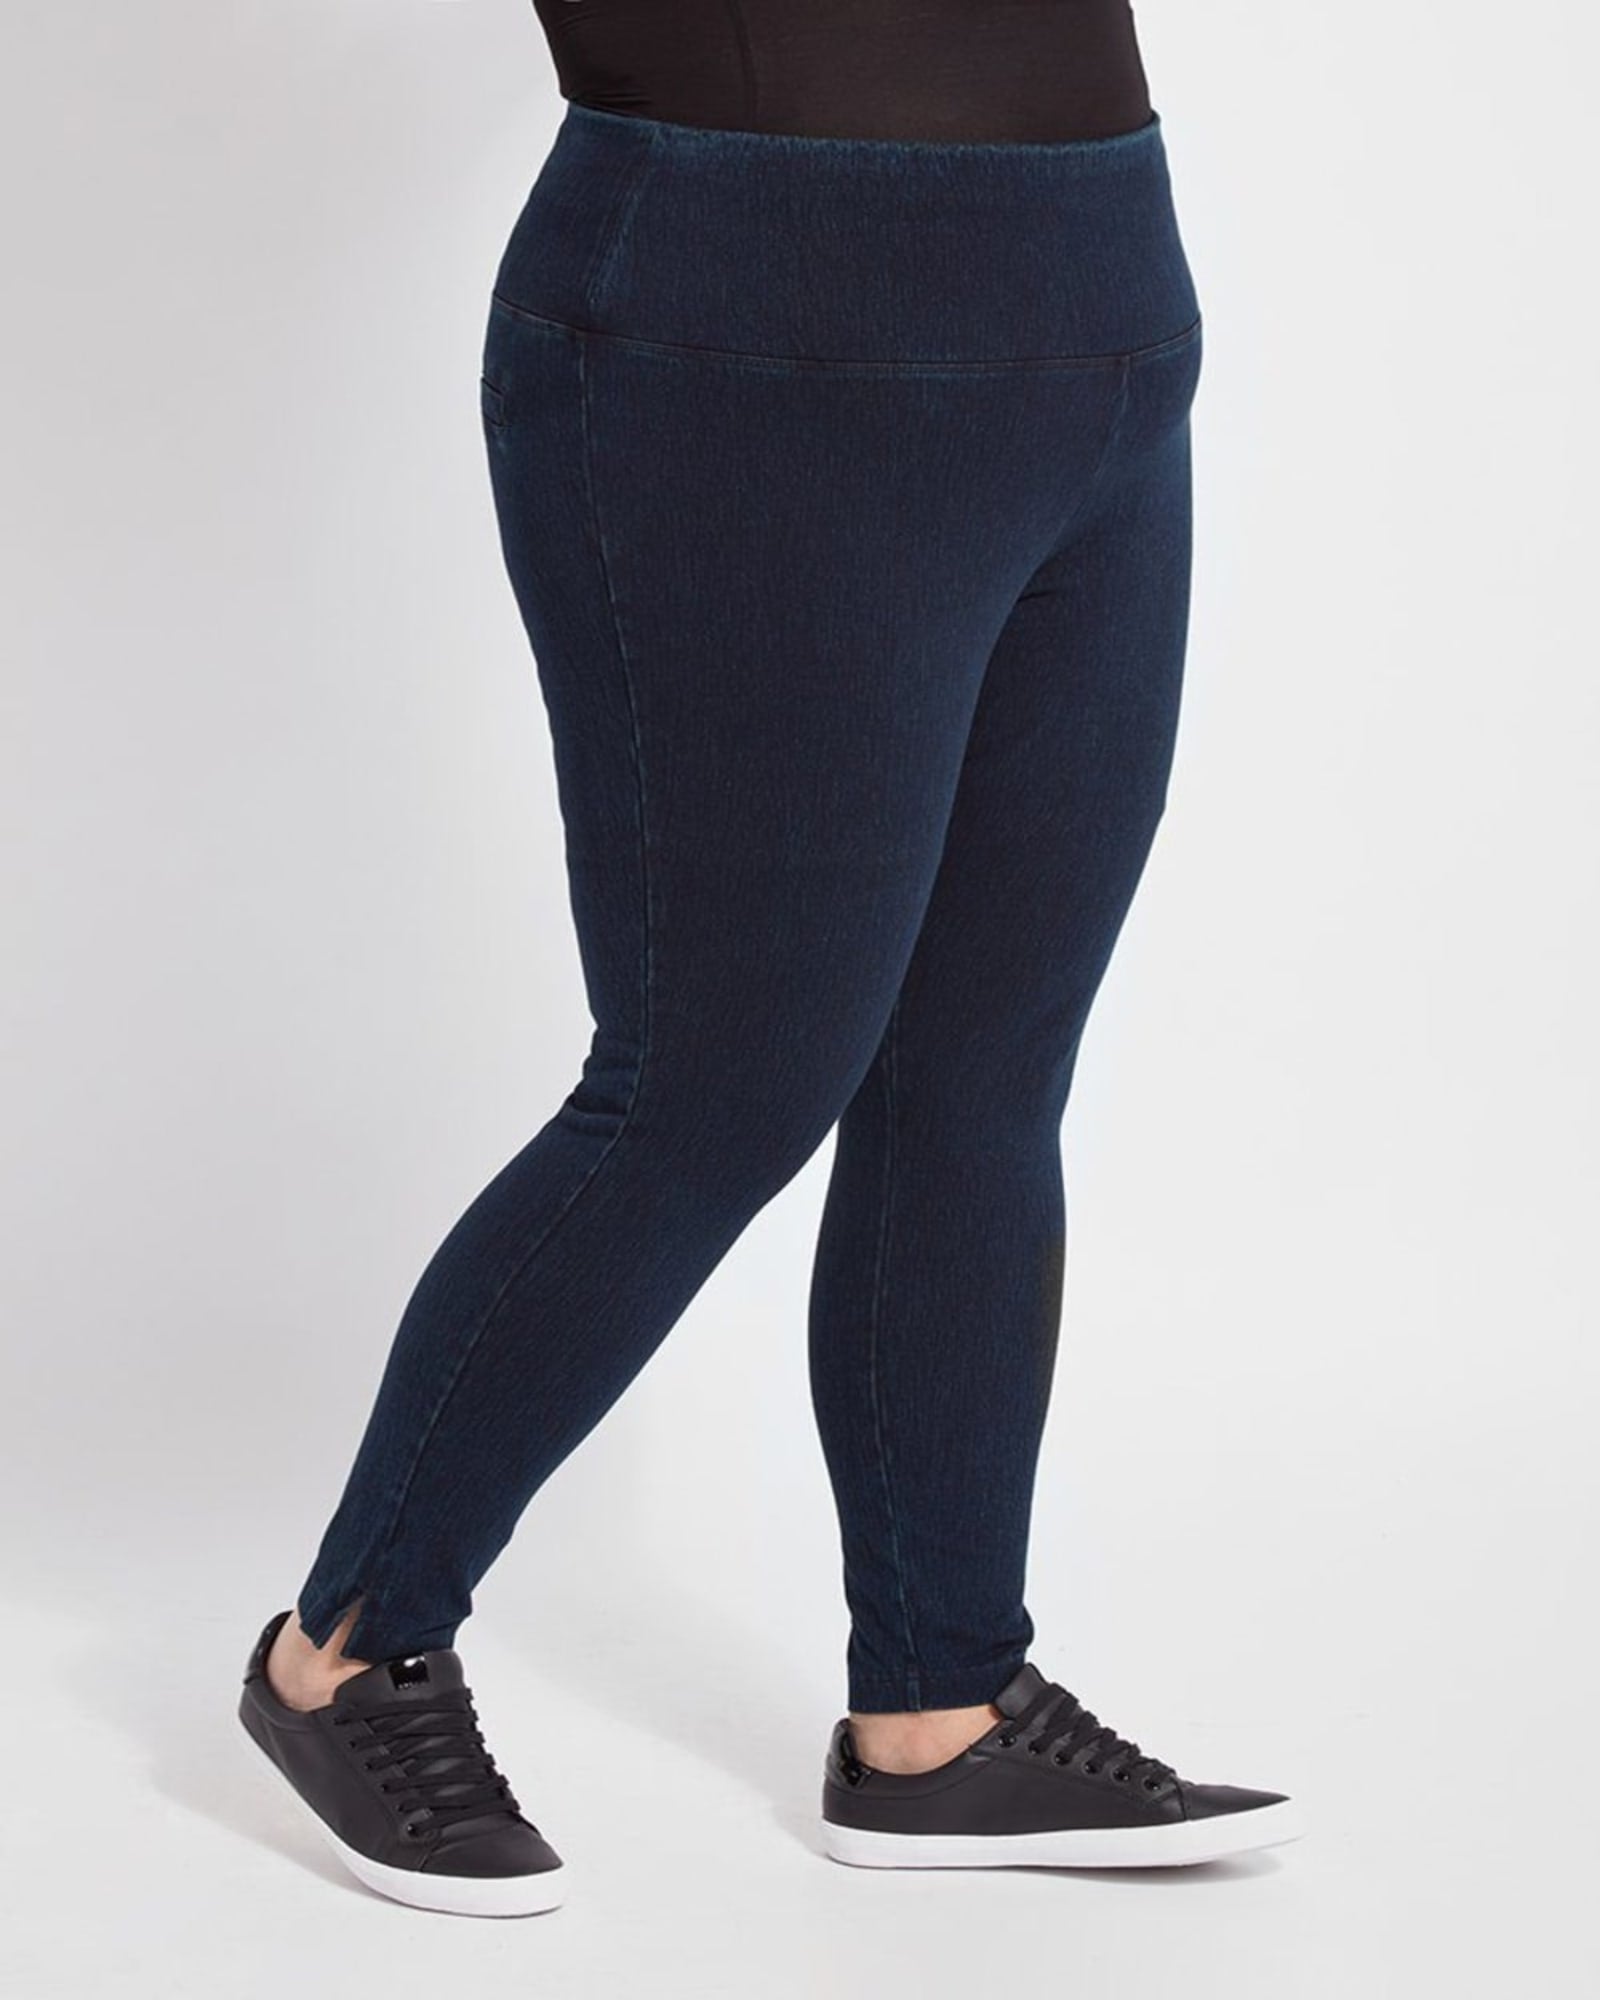 PLUS SIZE WOMEN SHADED CASUAL NAVY BLUE JEANS